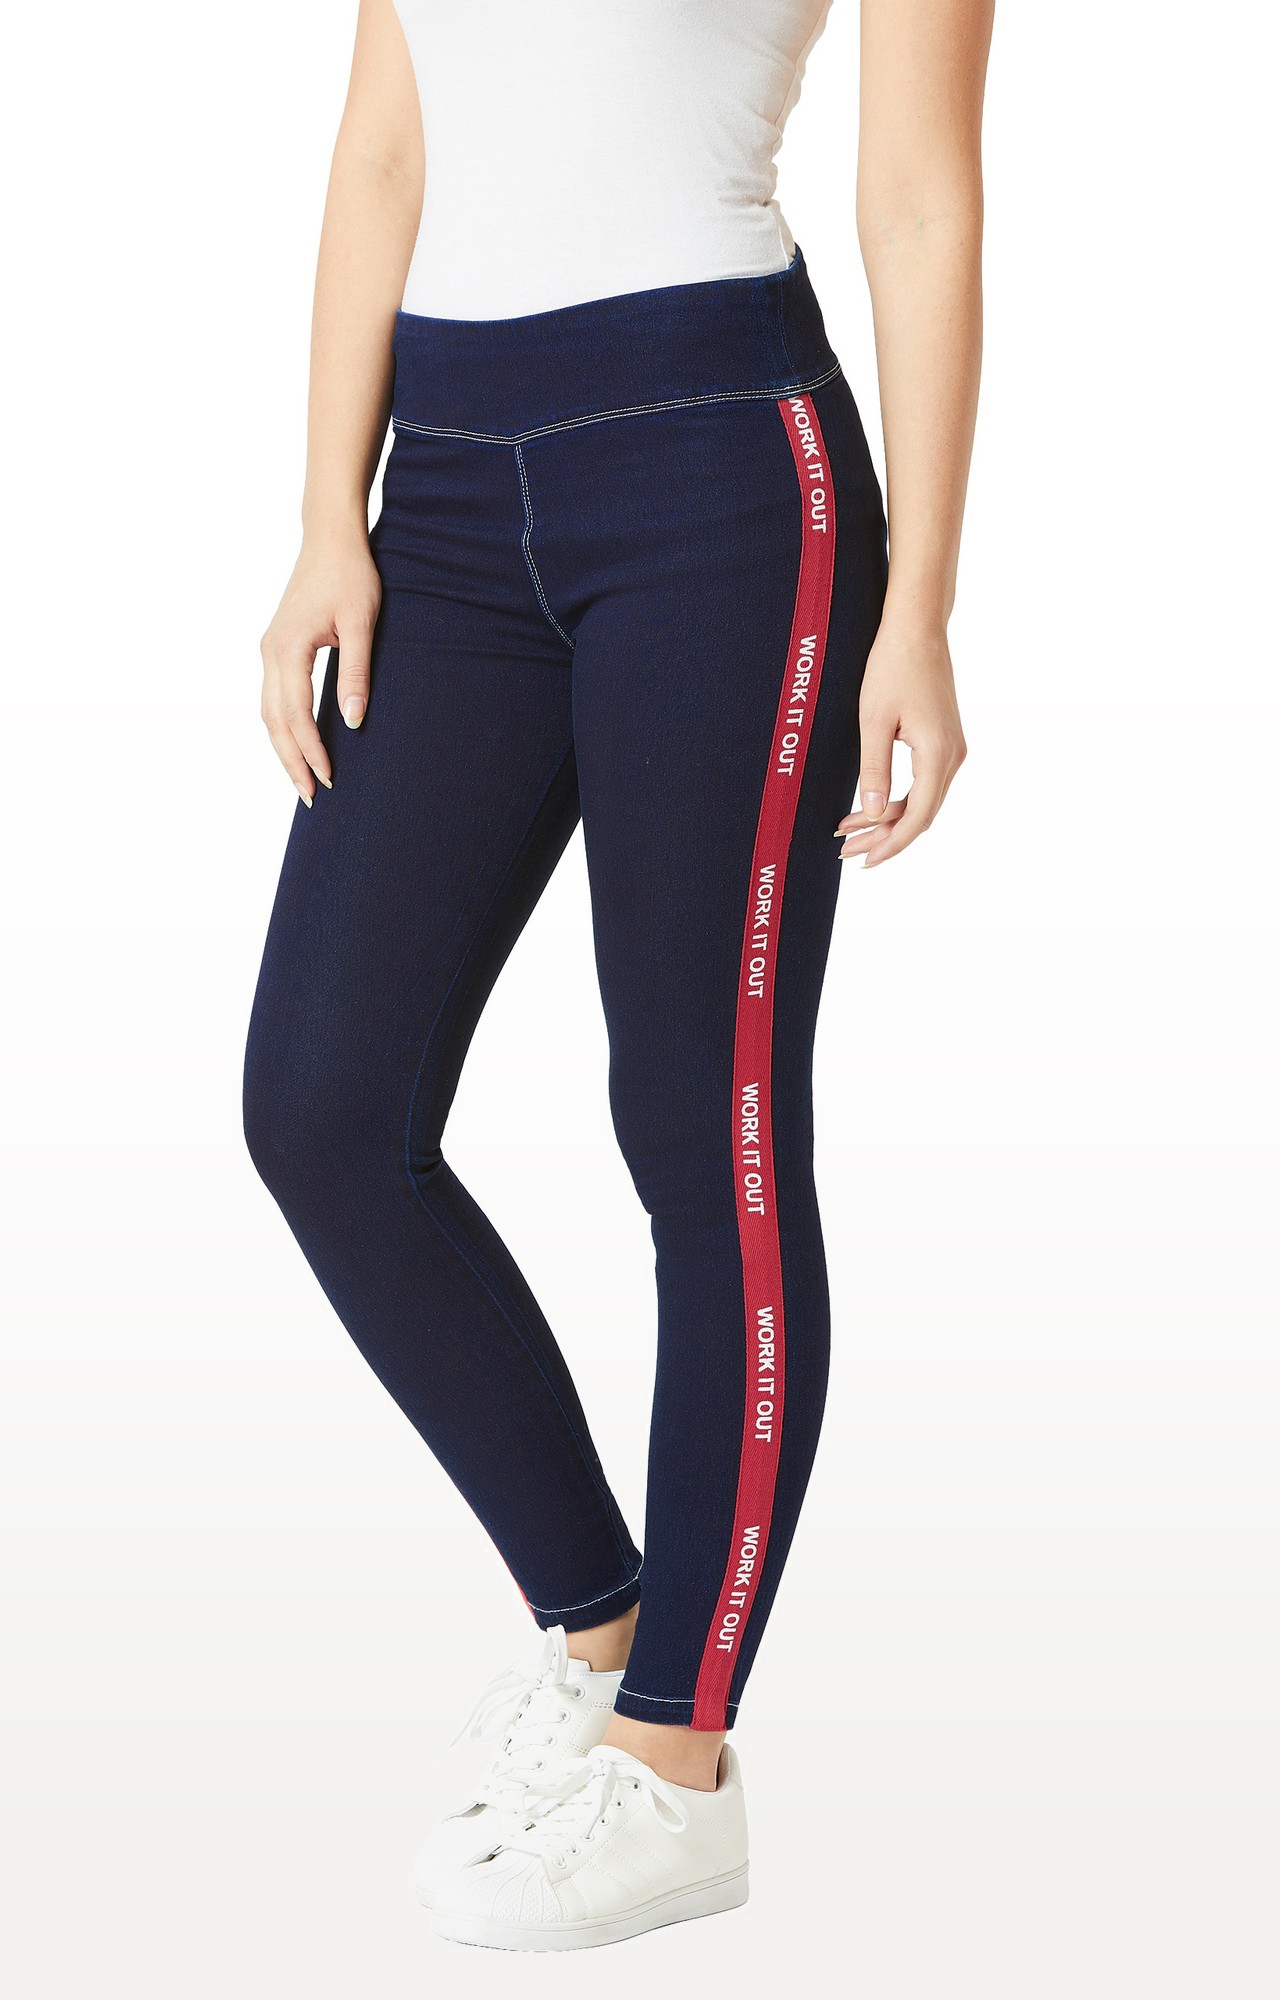 MISS CHASE | Navy Solid High Rise Clean Look Regular Length Twill Tape Detailing Stretchable Denim Jeggings